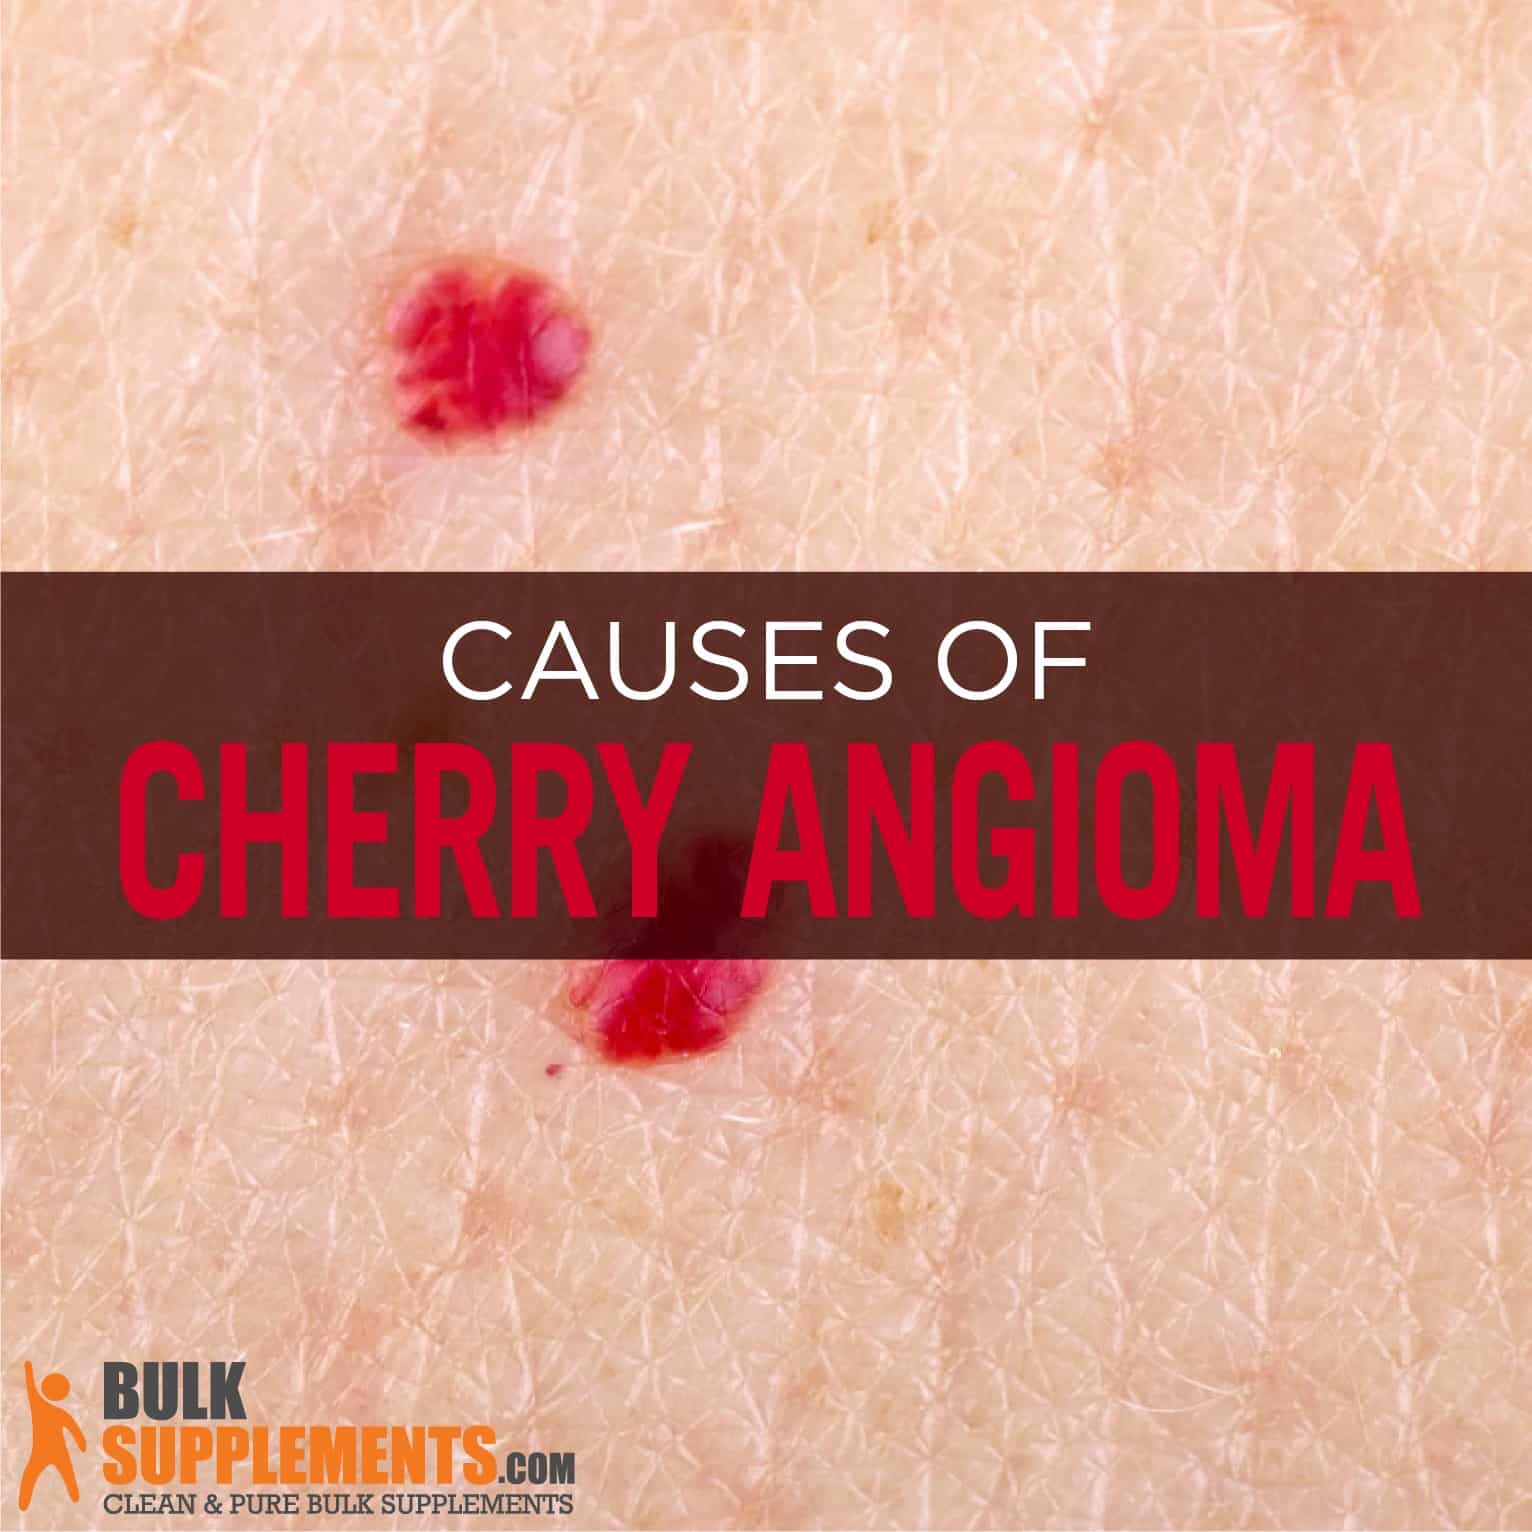 What Is Cherry Angioma? Causes, Symptoms, Risk Factors, and More